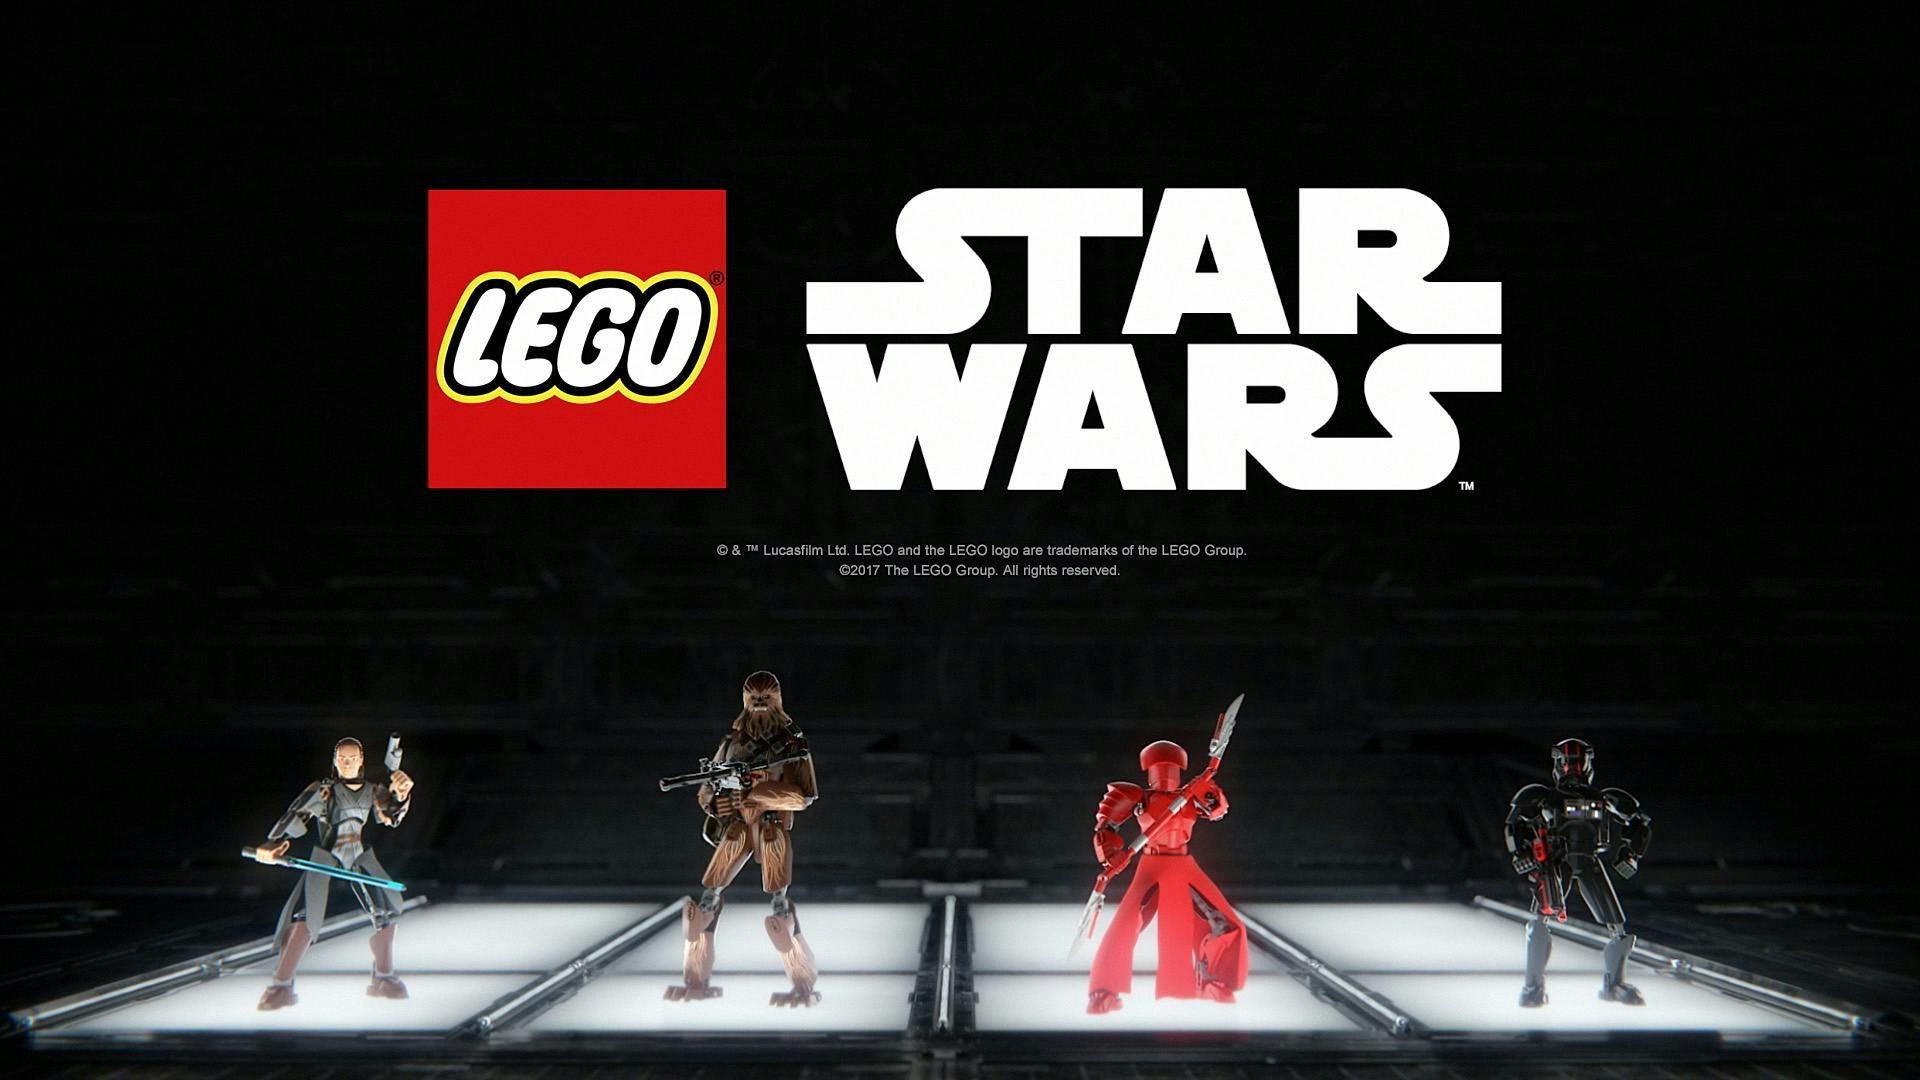 Packshot of all the characters of the Star Wars Lego buildable figures